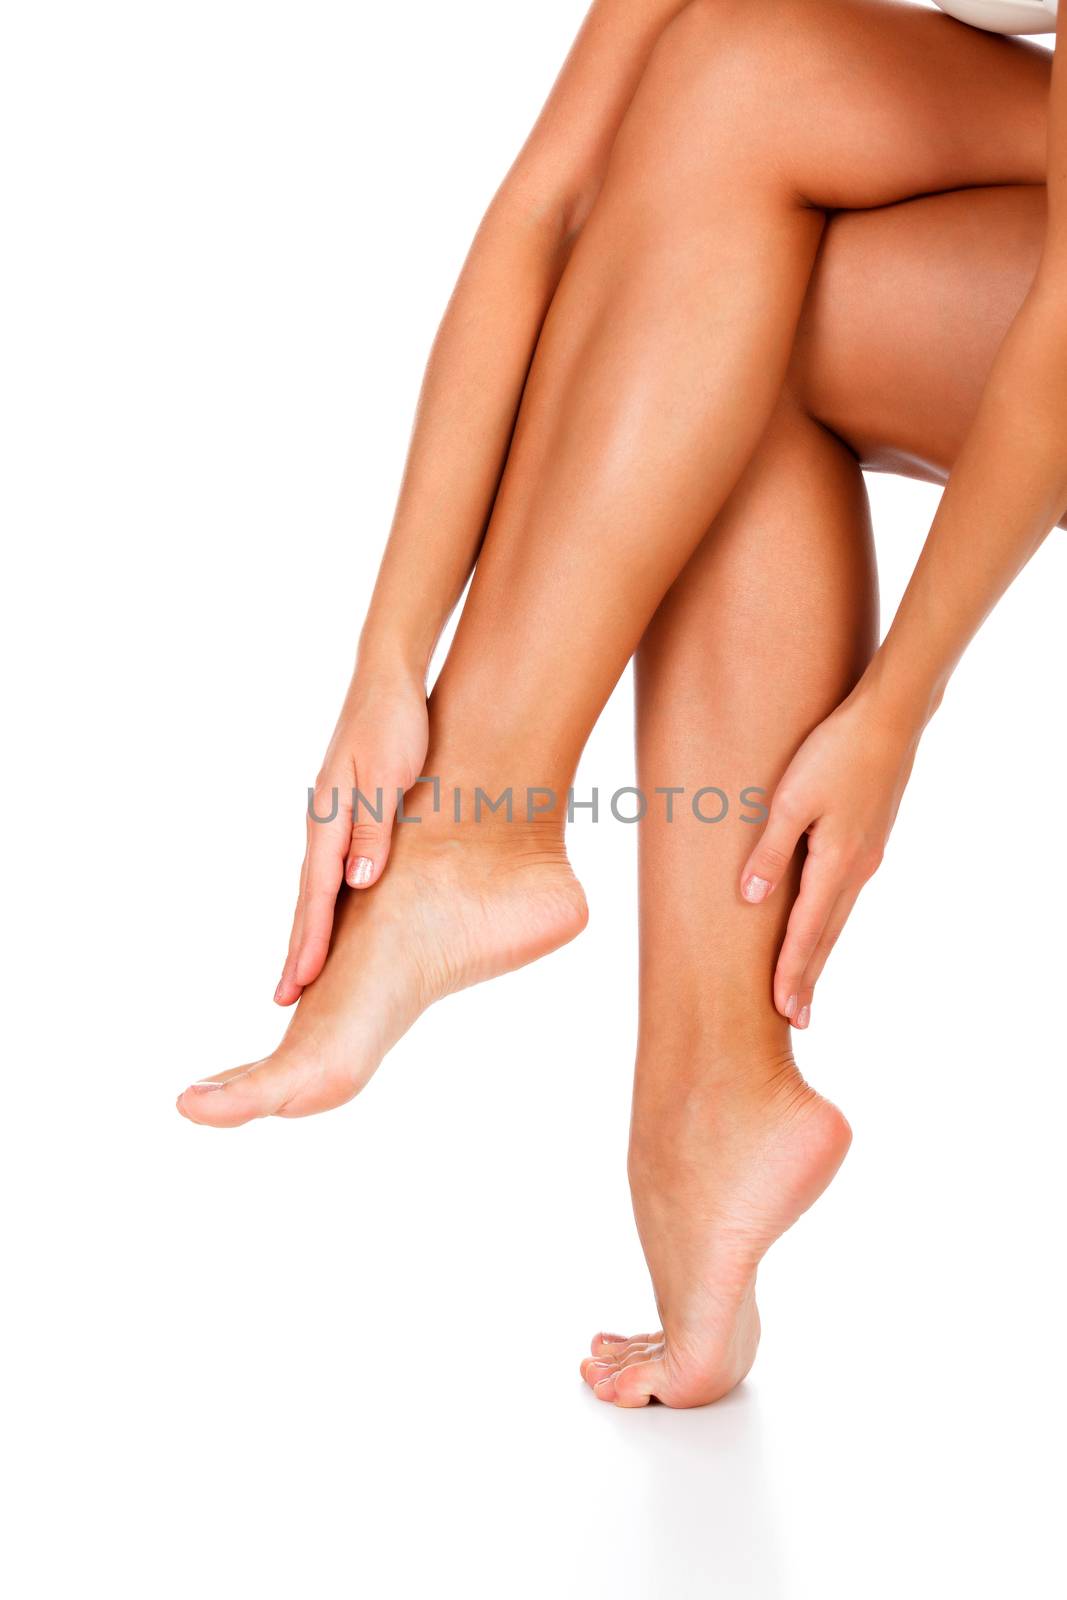 Woman's legs with clean and smooth skin on white background, isolated